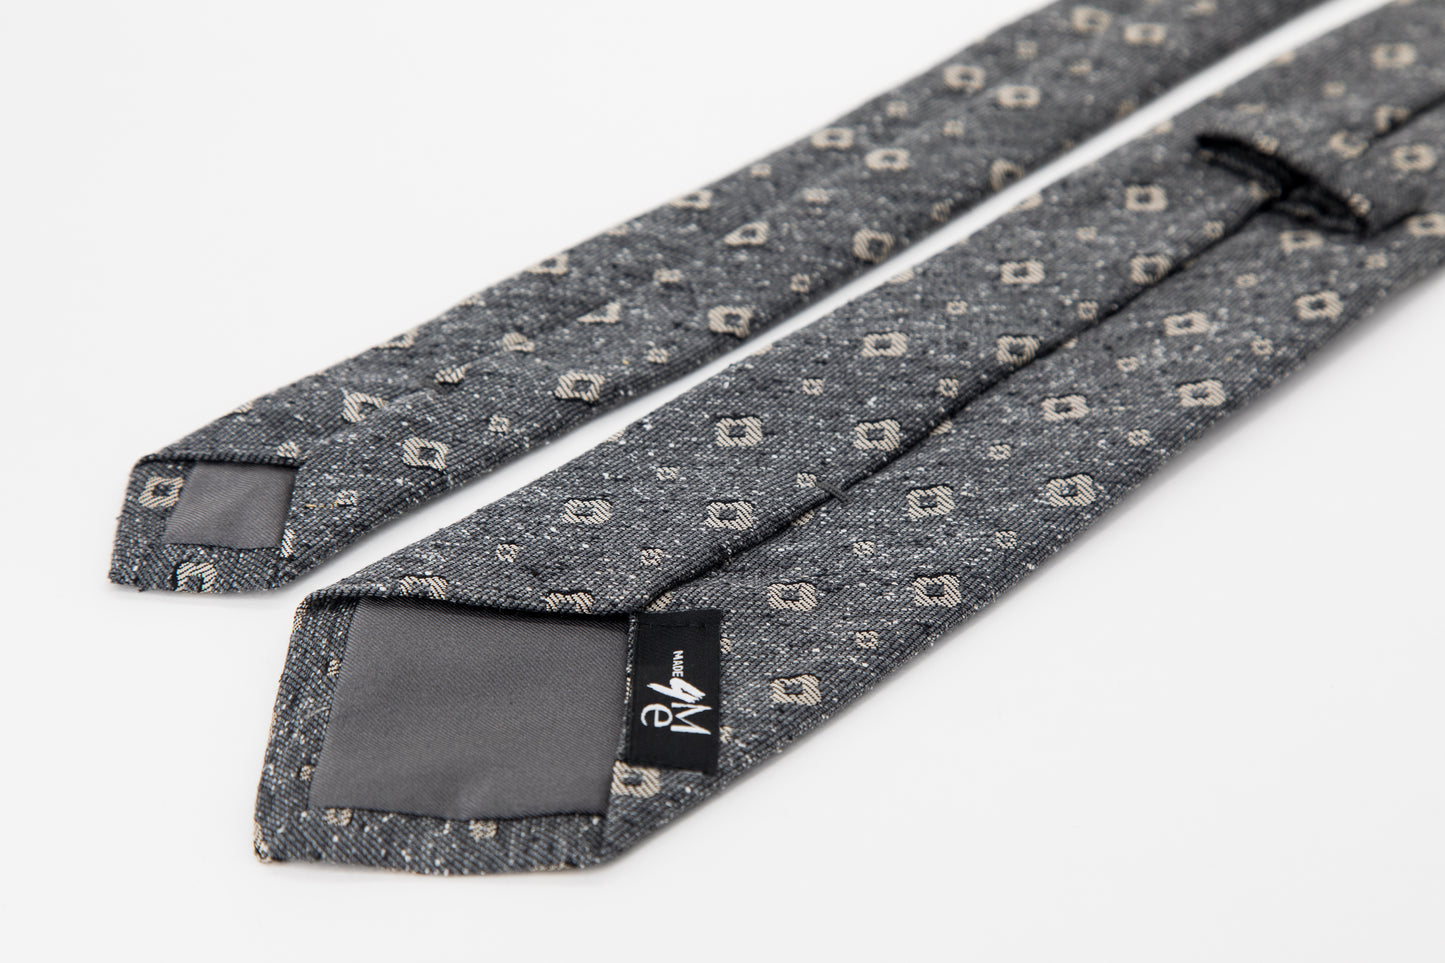 TIE - Light Grey Square on Speckled Grey Background